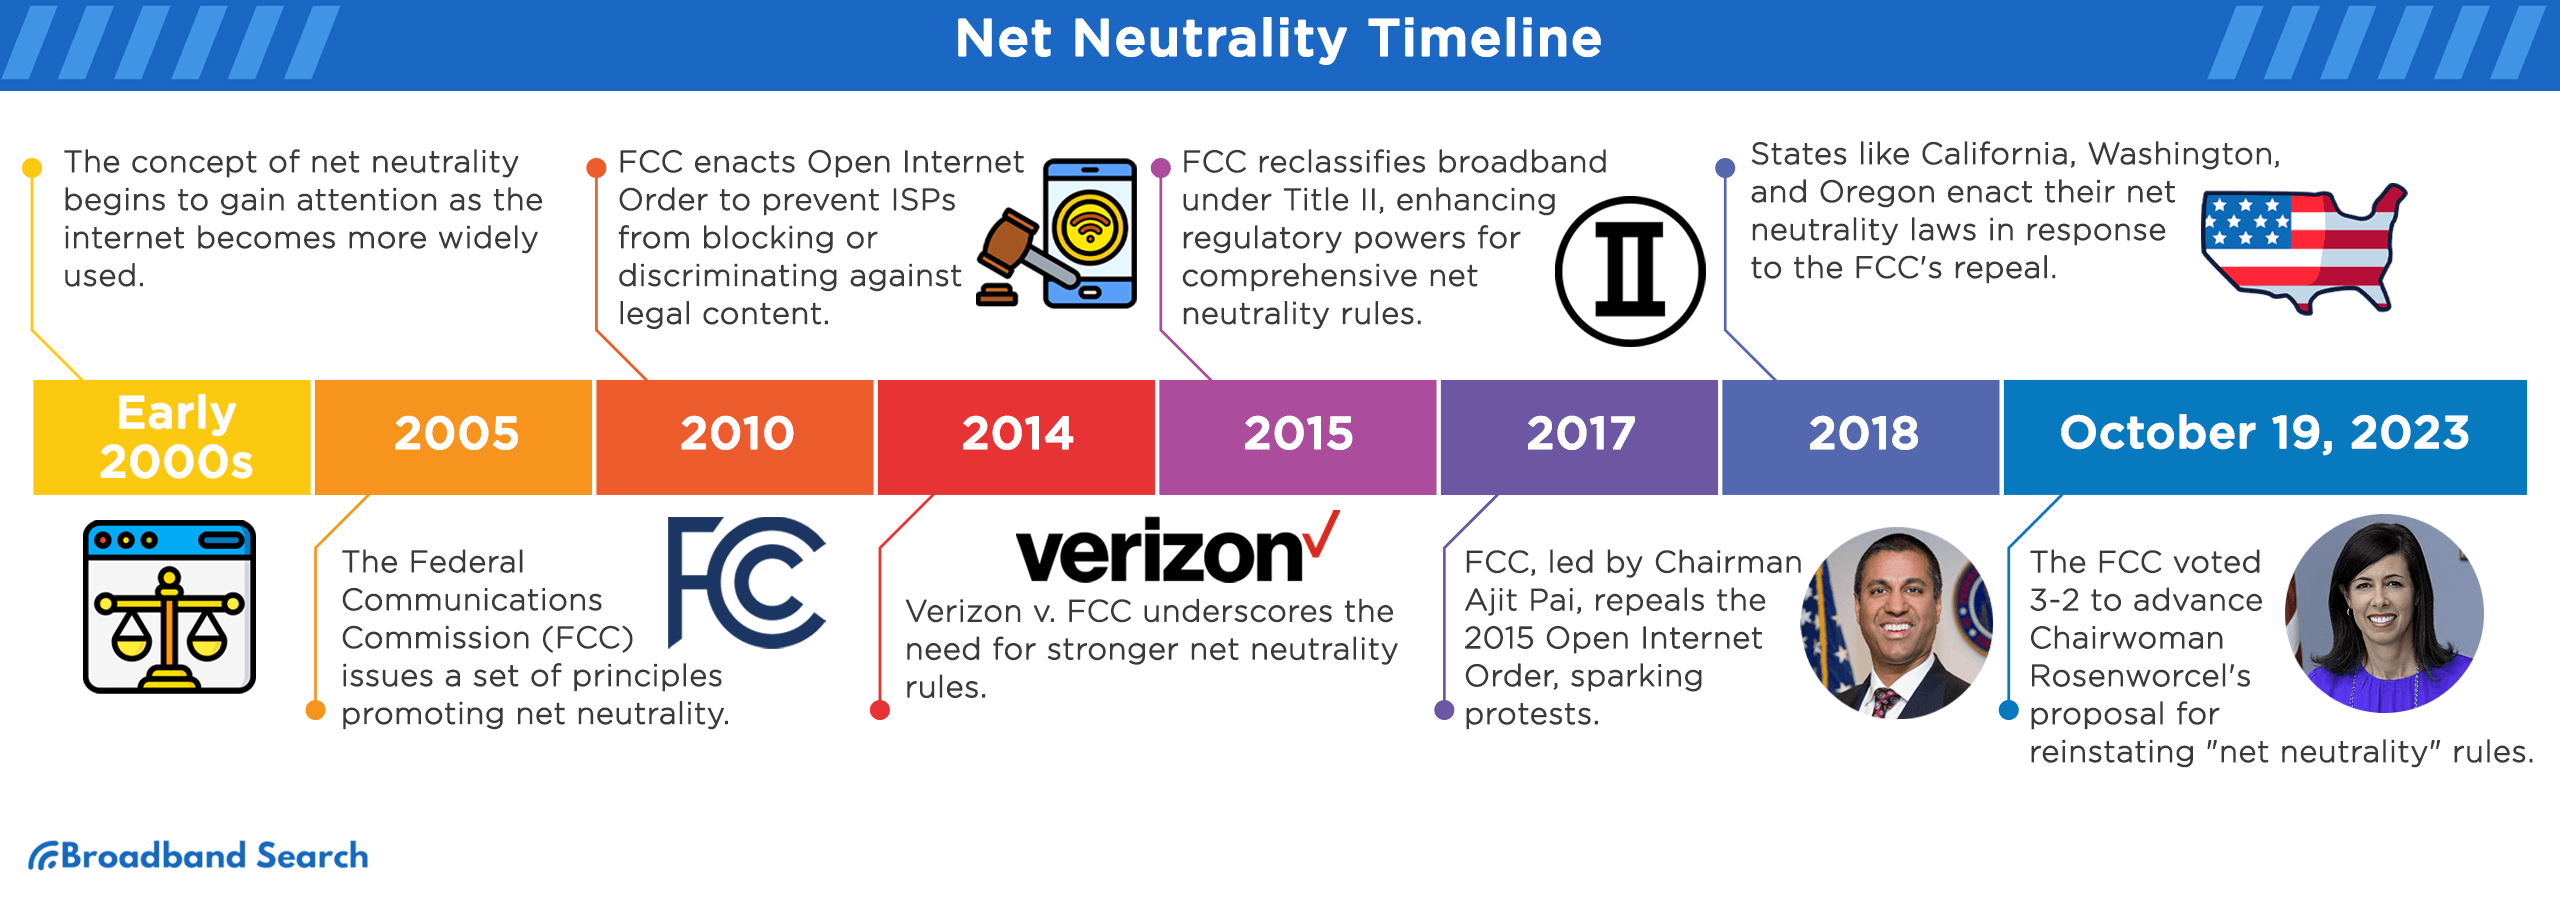 Timeline of Net Neutrality in the US